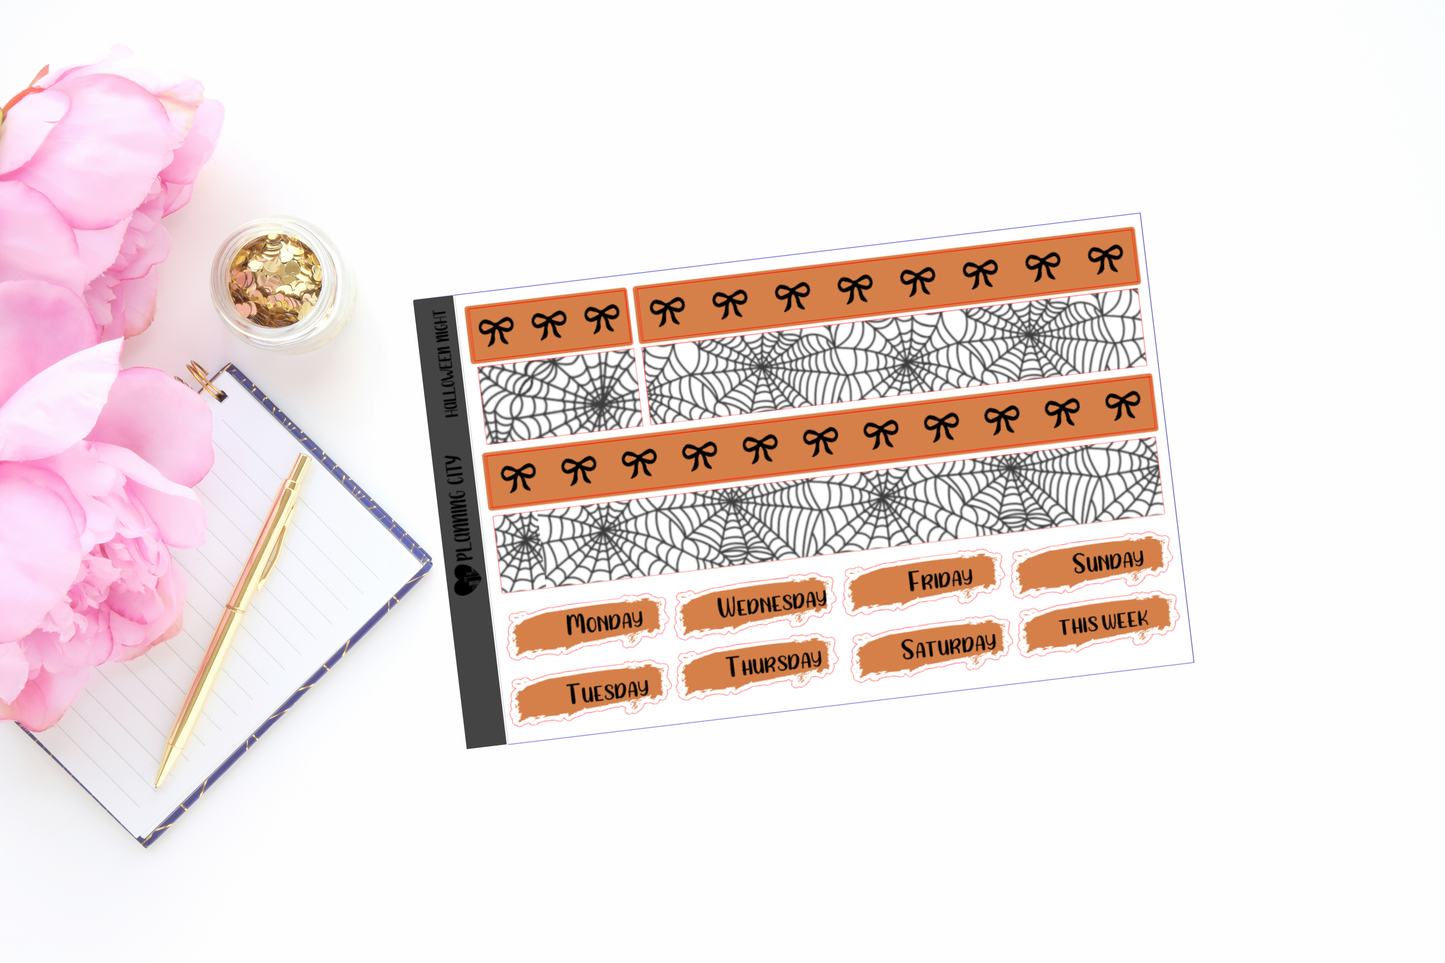 Halloween Night Foiled Washi & Date Covers Add on